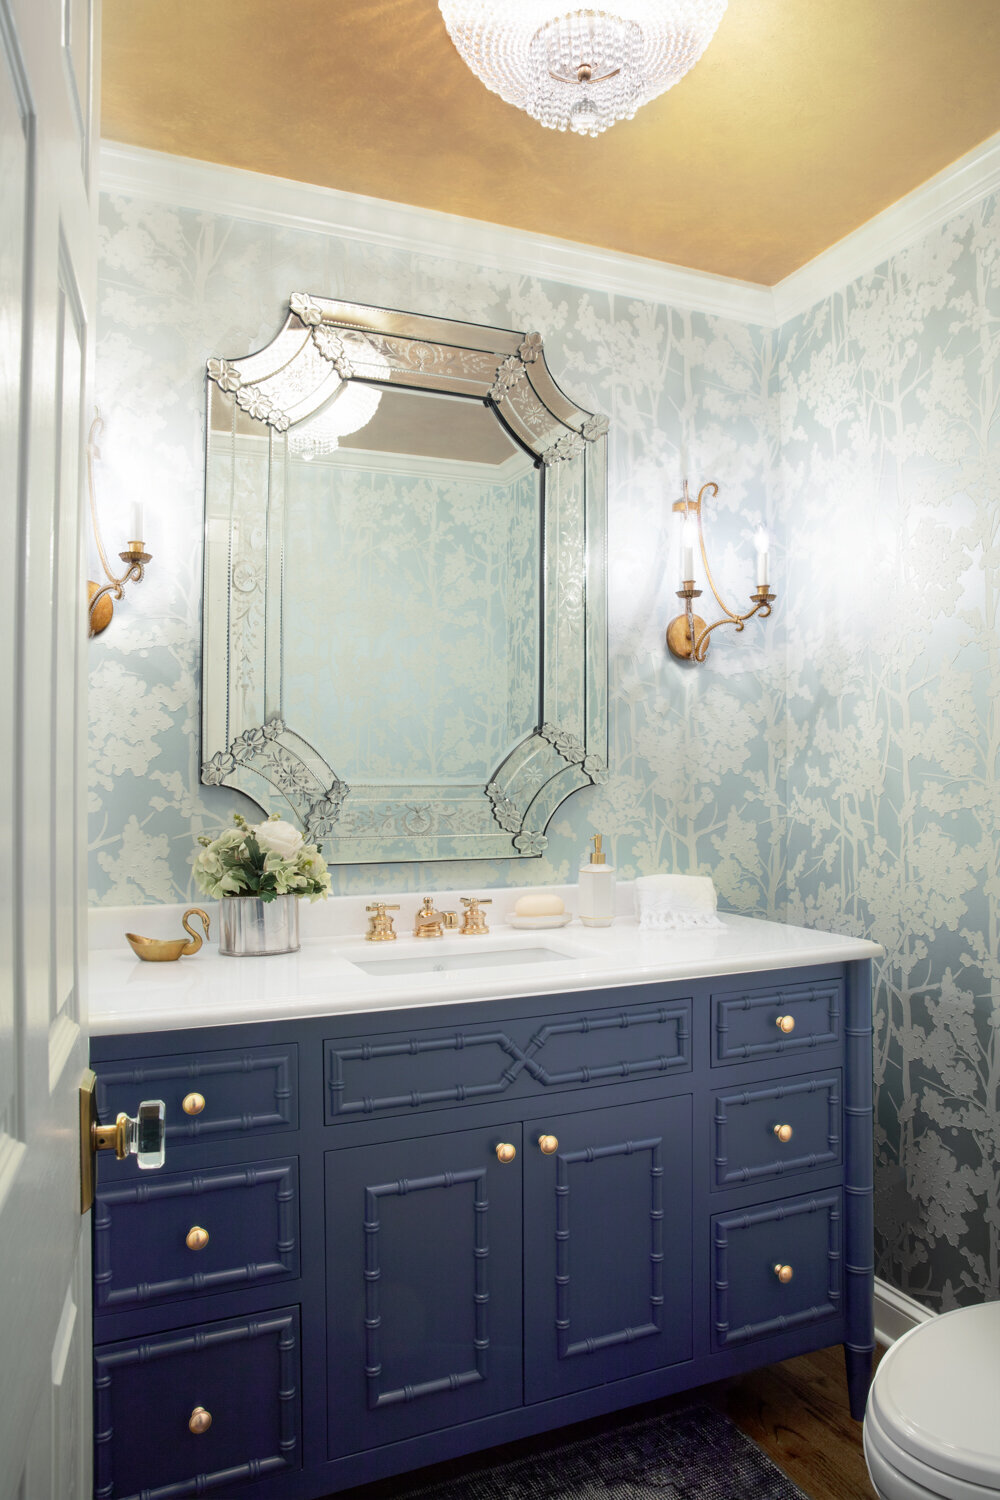 Panageries Residential Interior Design | Vibrant Classic Bungalow Powder Bath Design With Mirror And Glamour Lighting